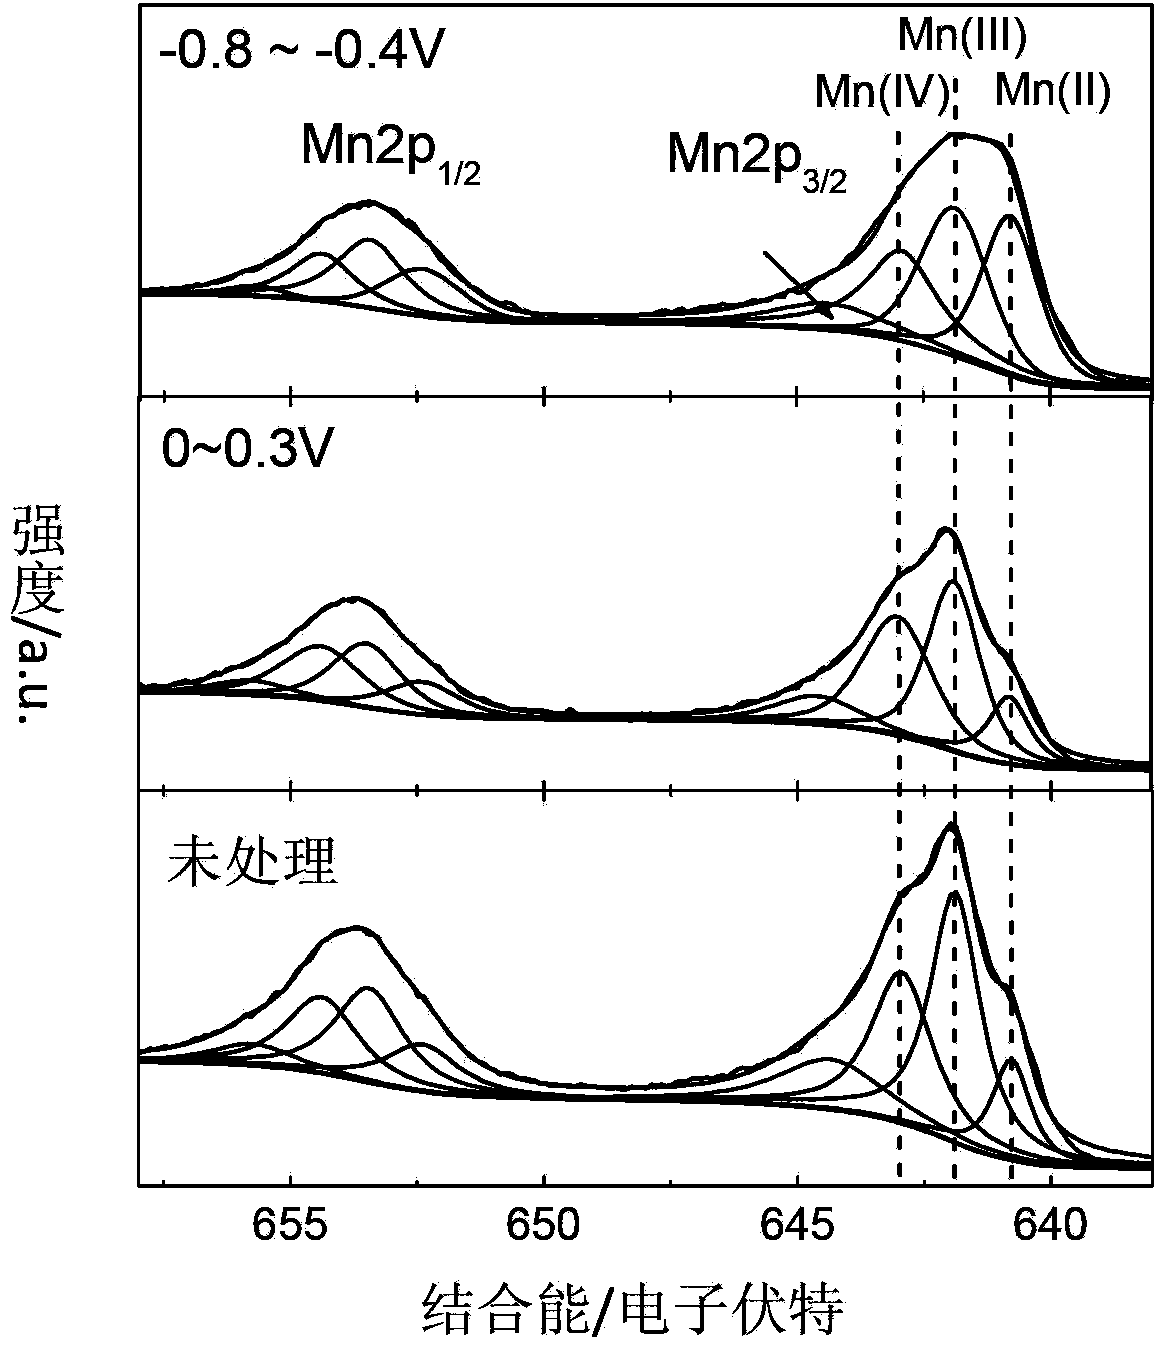 Method for increasing oxygen reduction activity of MnOx catalyst in electrode